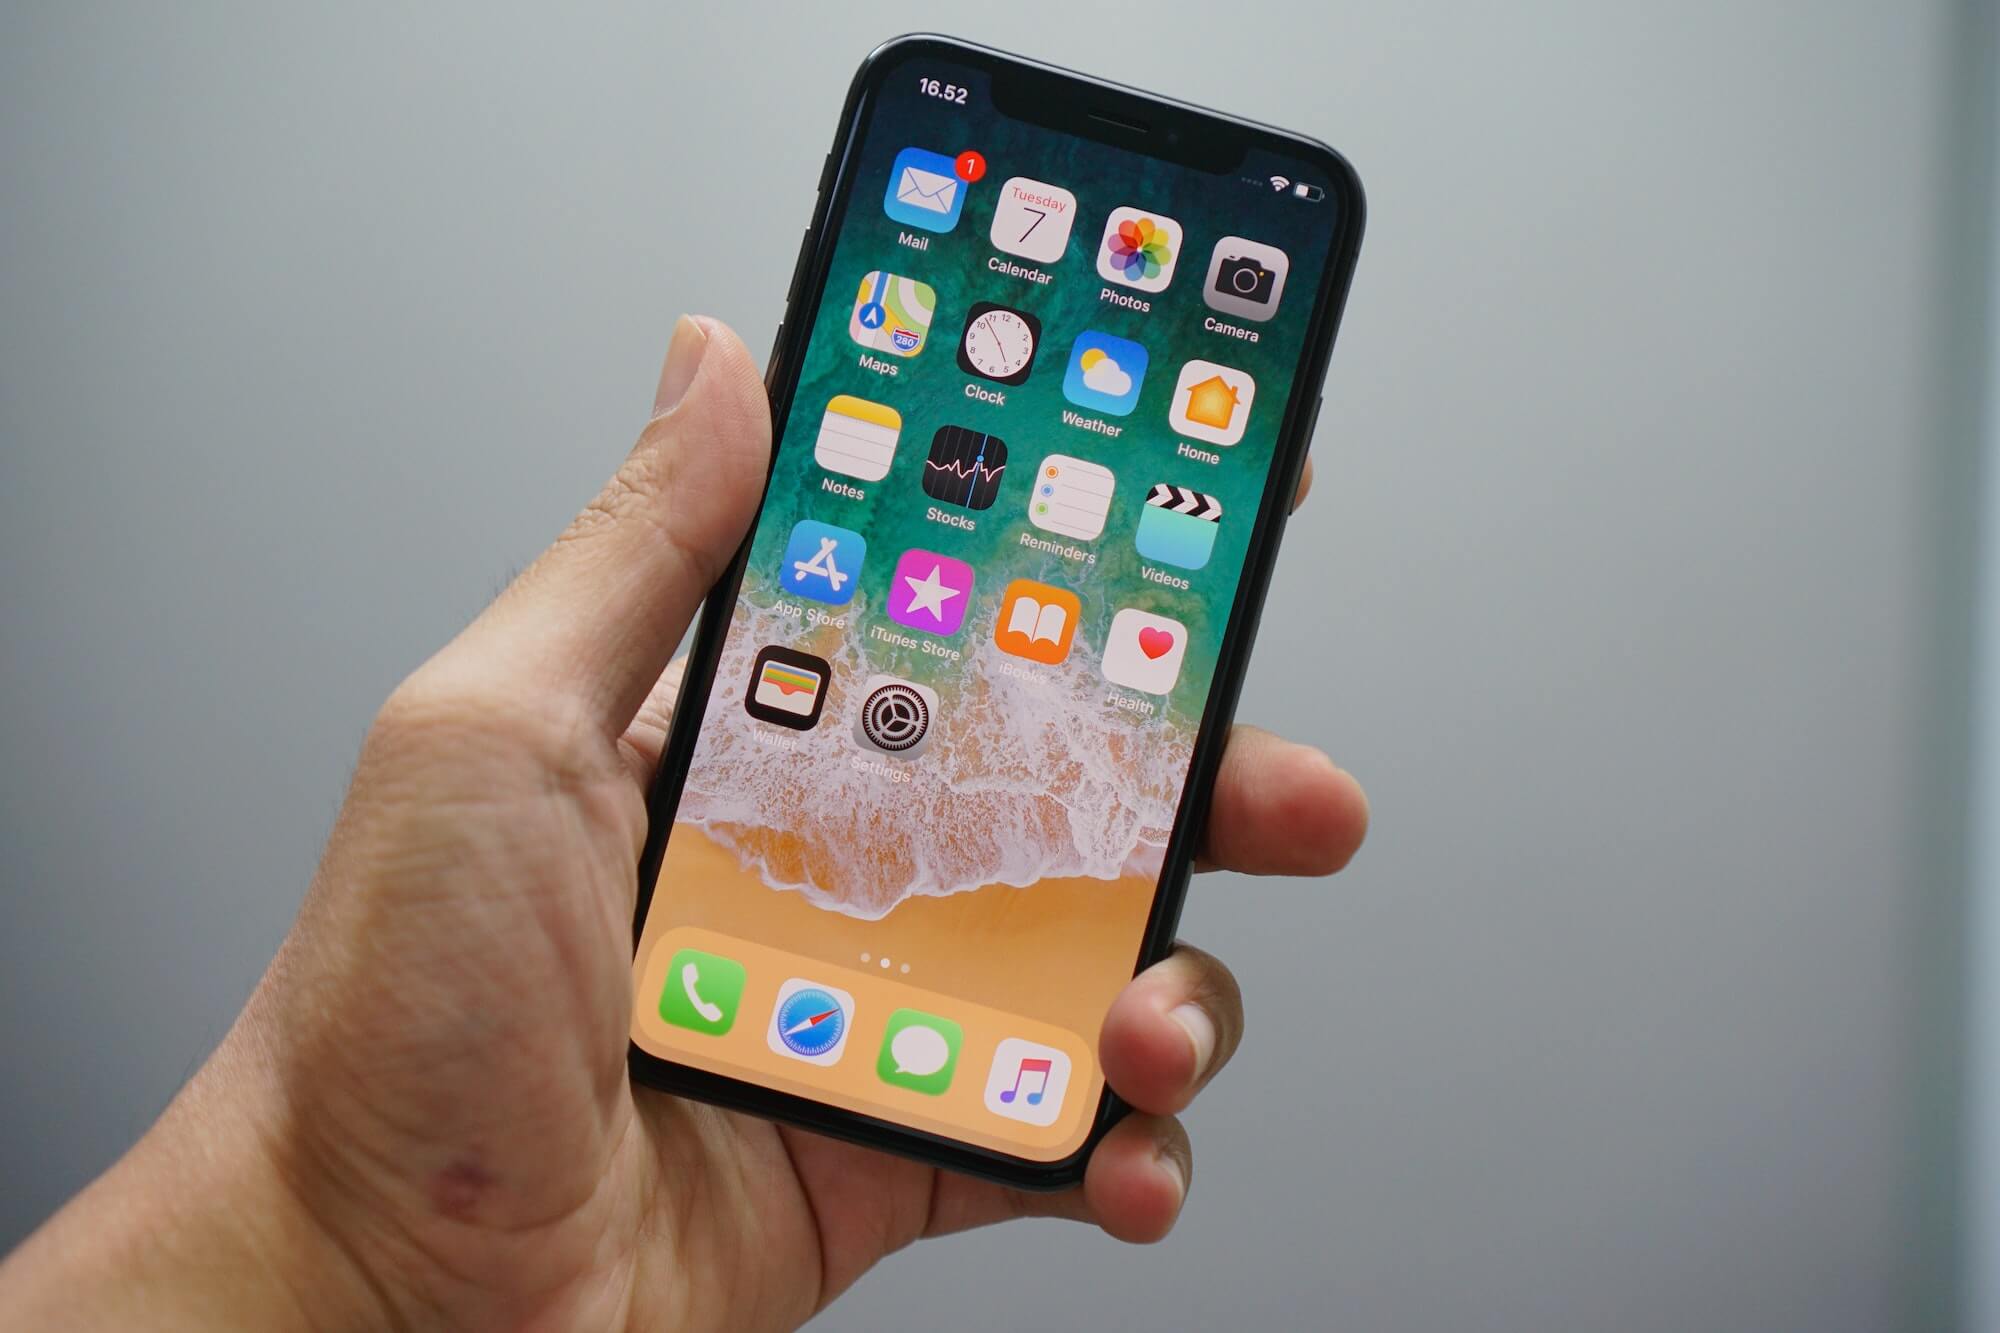 Here’s everything Apple just announced: iOS 14 will give